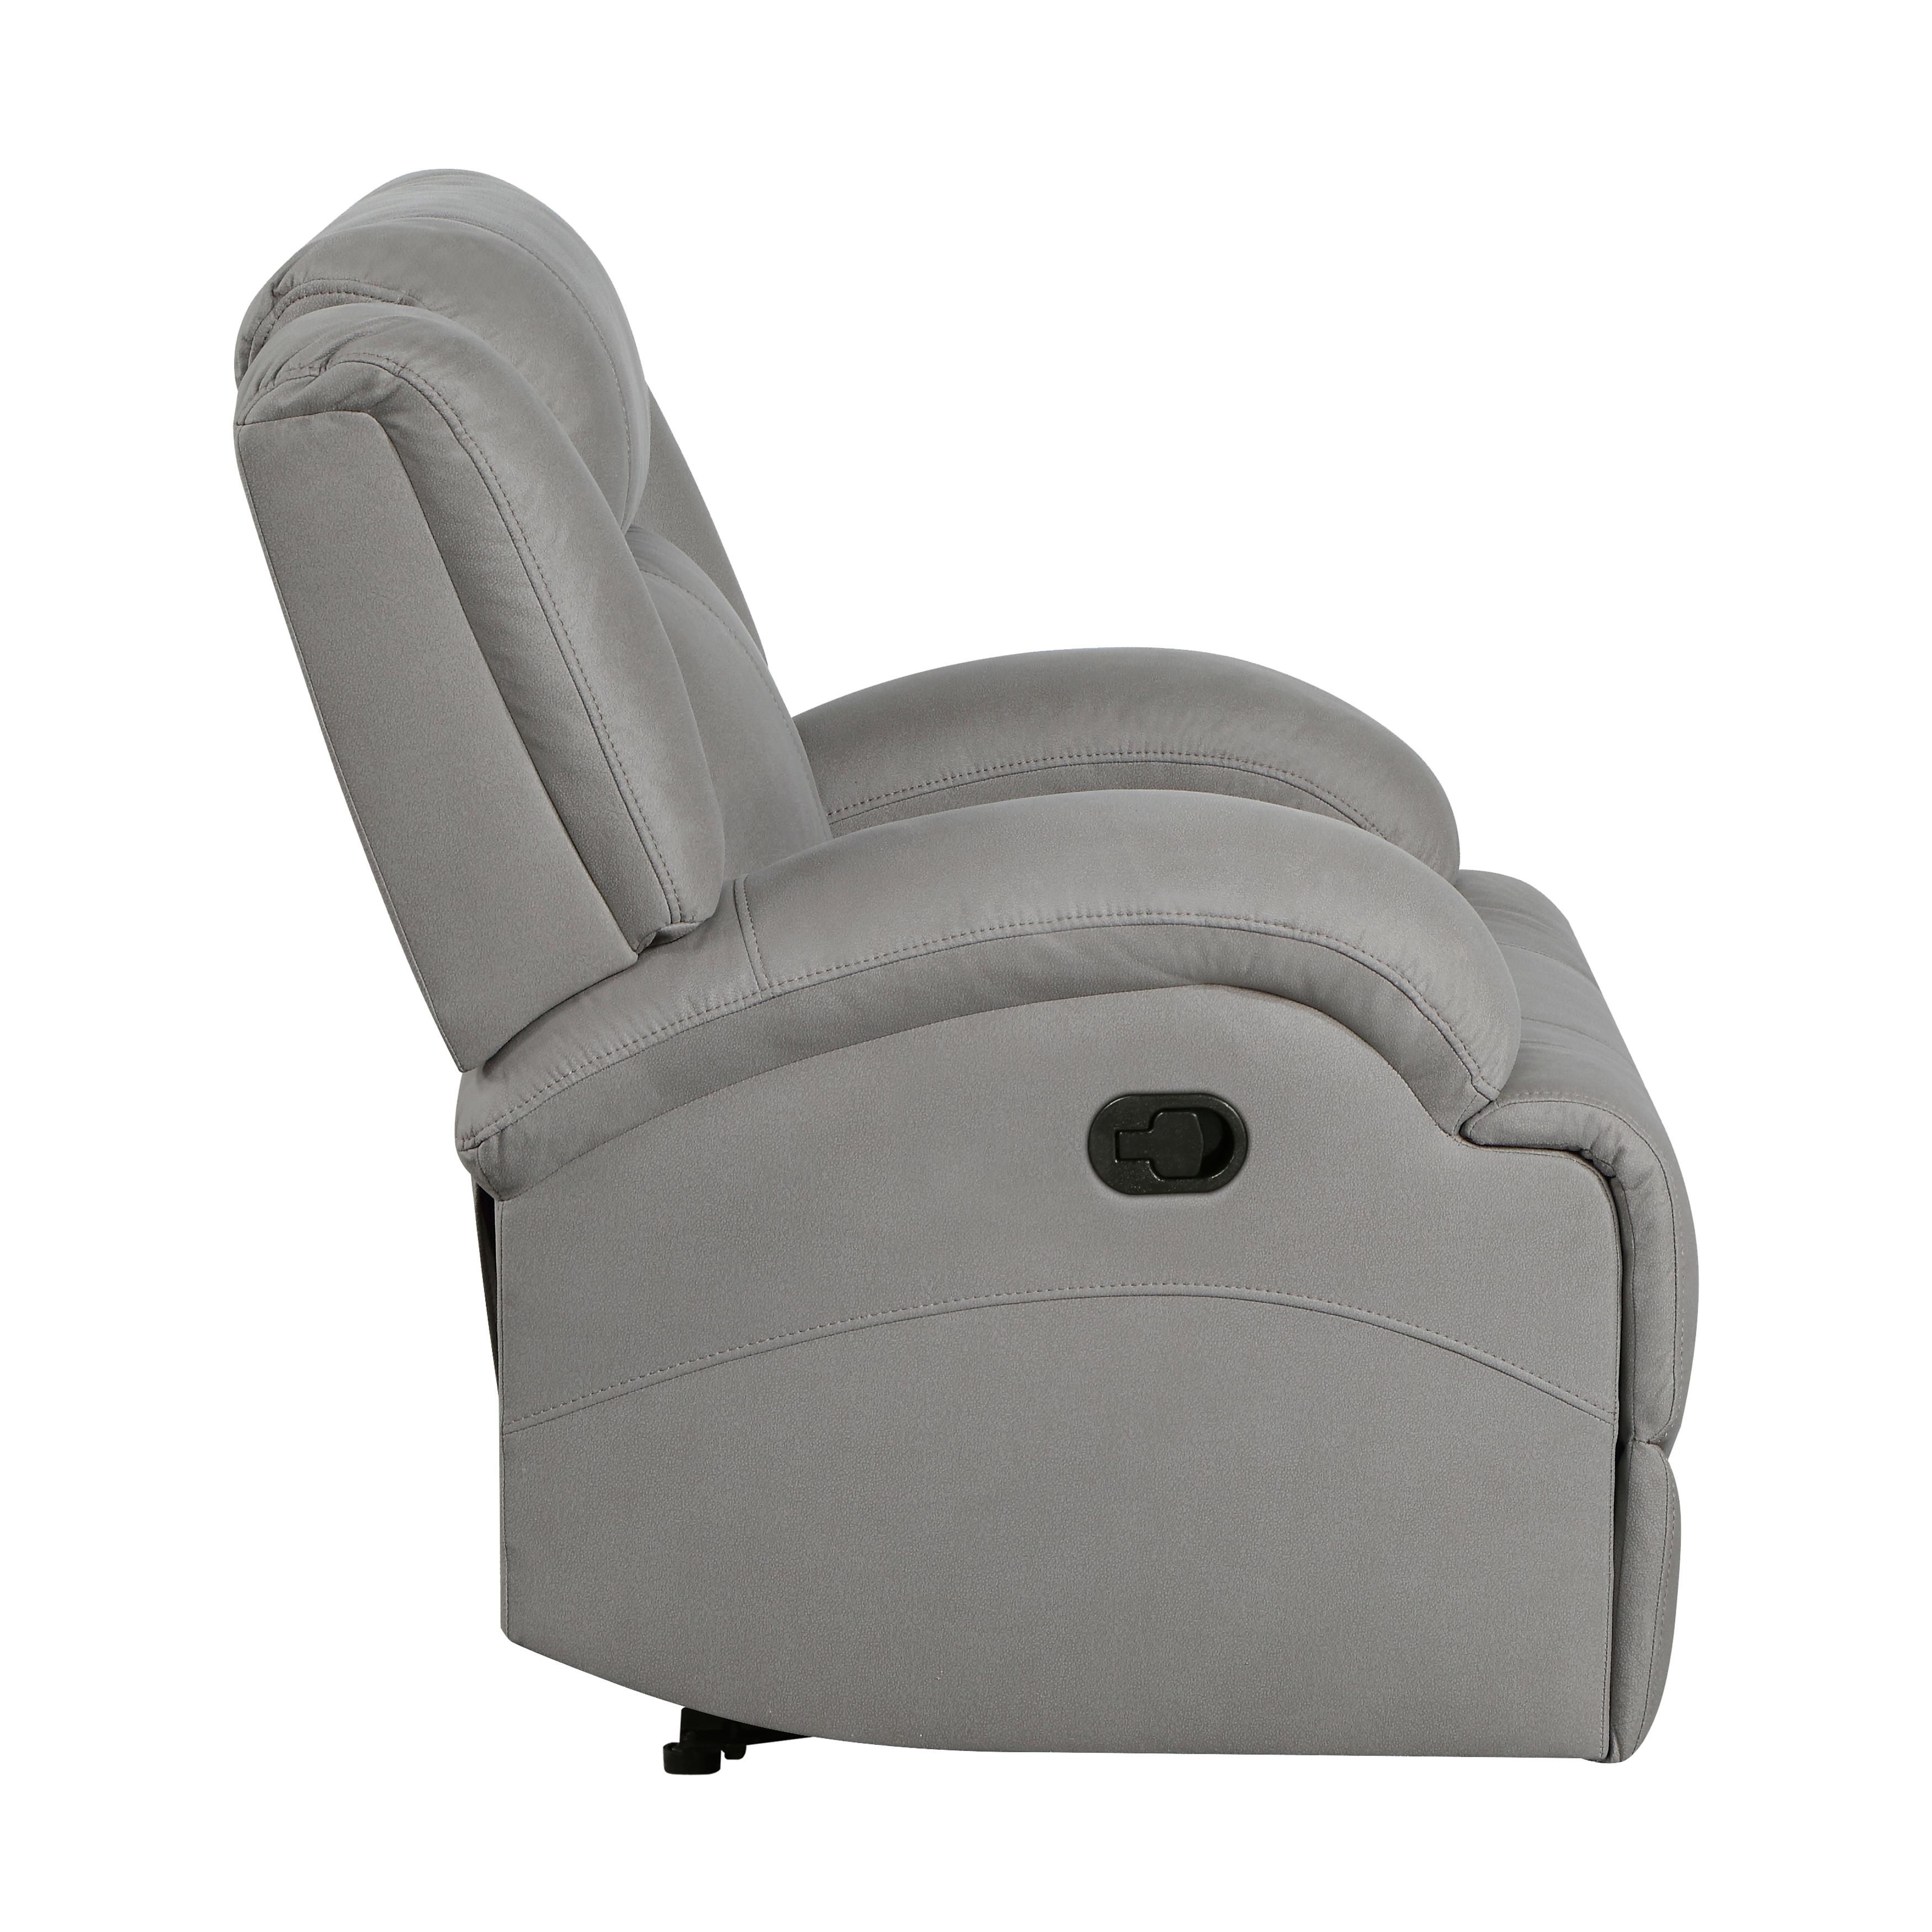 

    
Homelegance 9207GRY-1 Camryn Reclining Chair Gray 9207GRY-1
